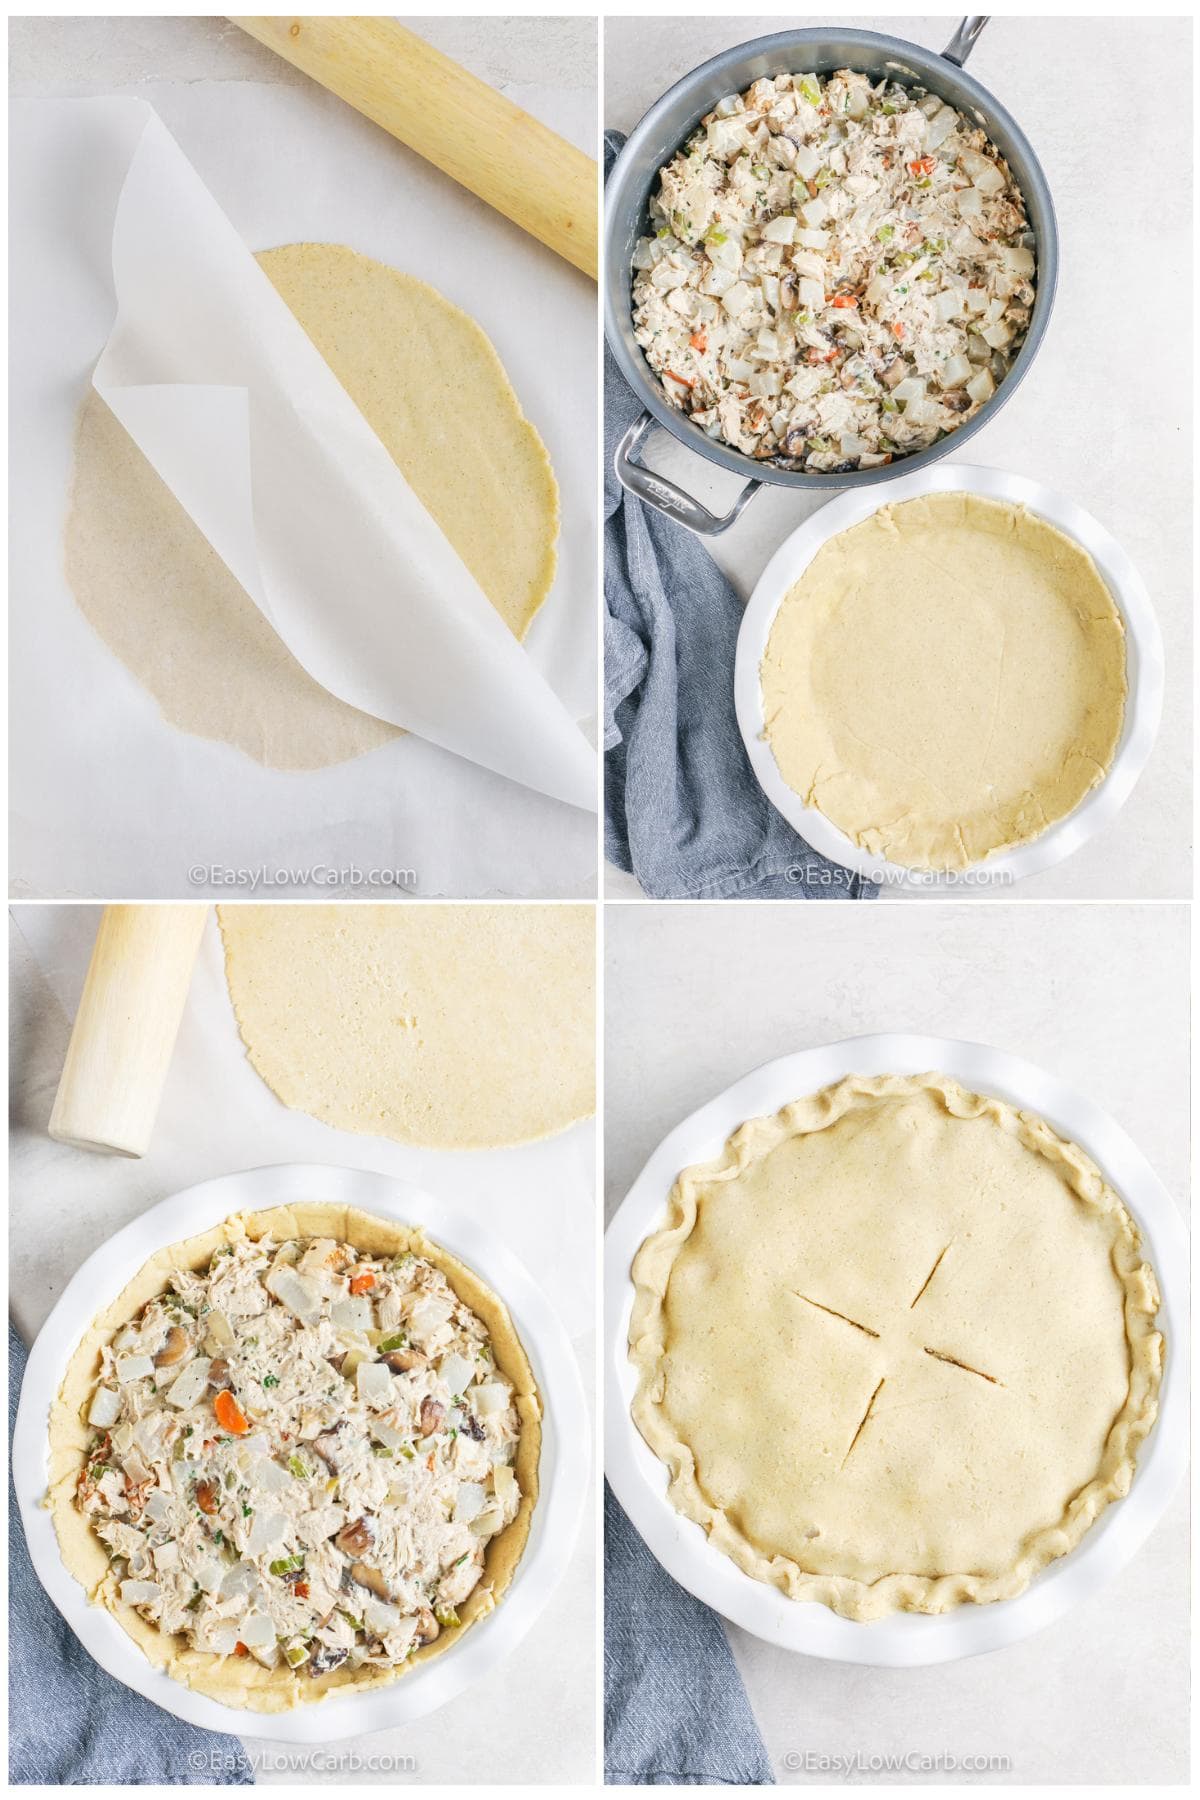 process of adding filling to pie shell to make Low Carb Chicken Pot Pie